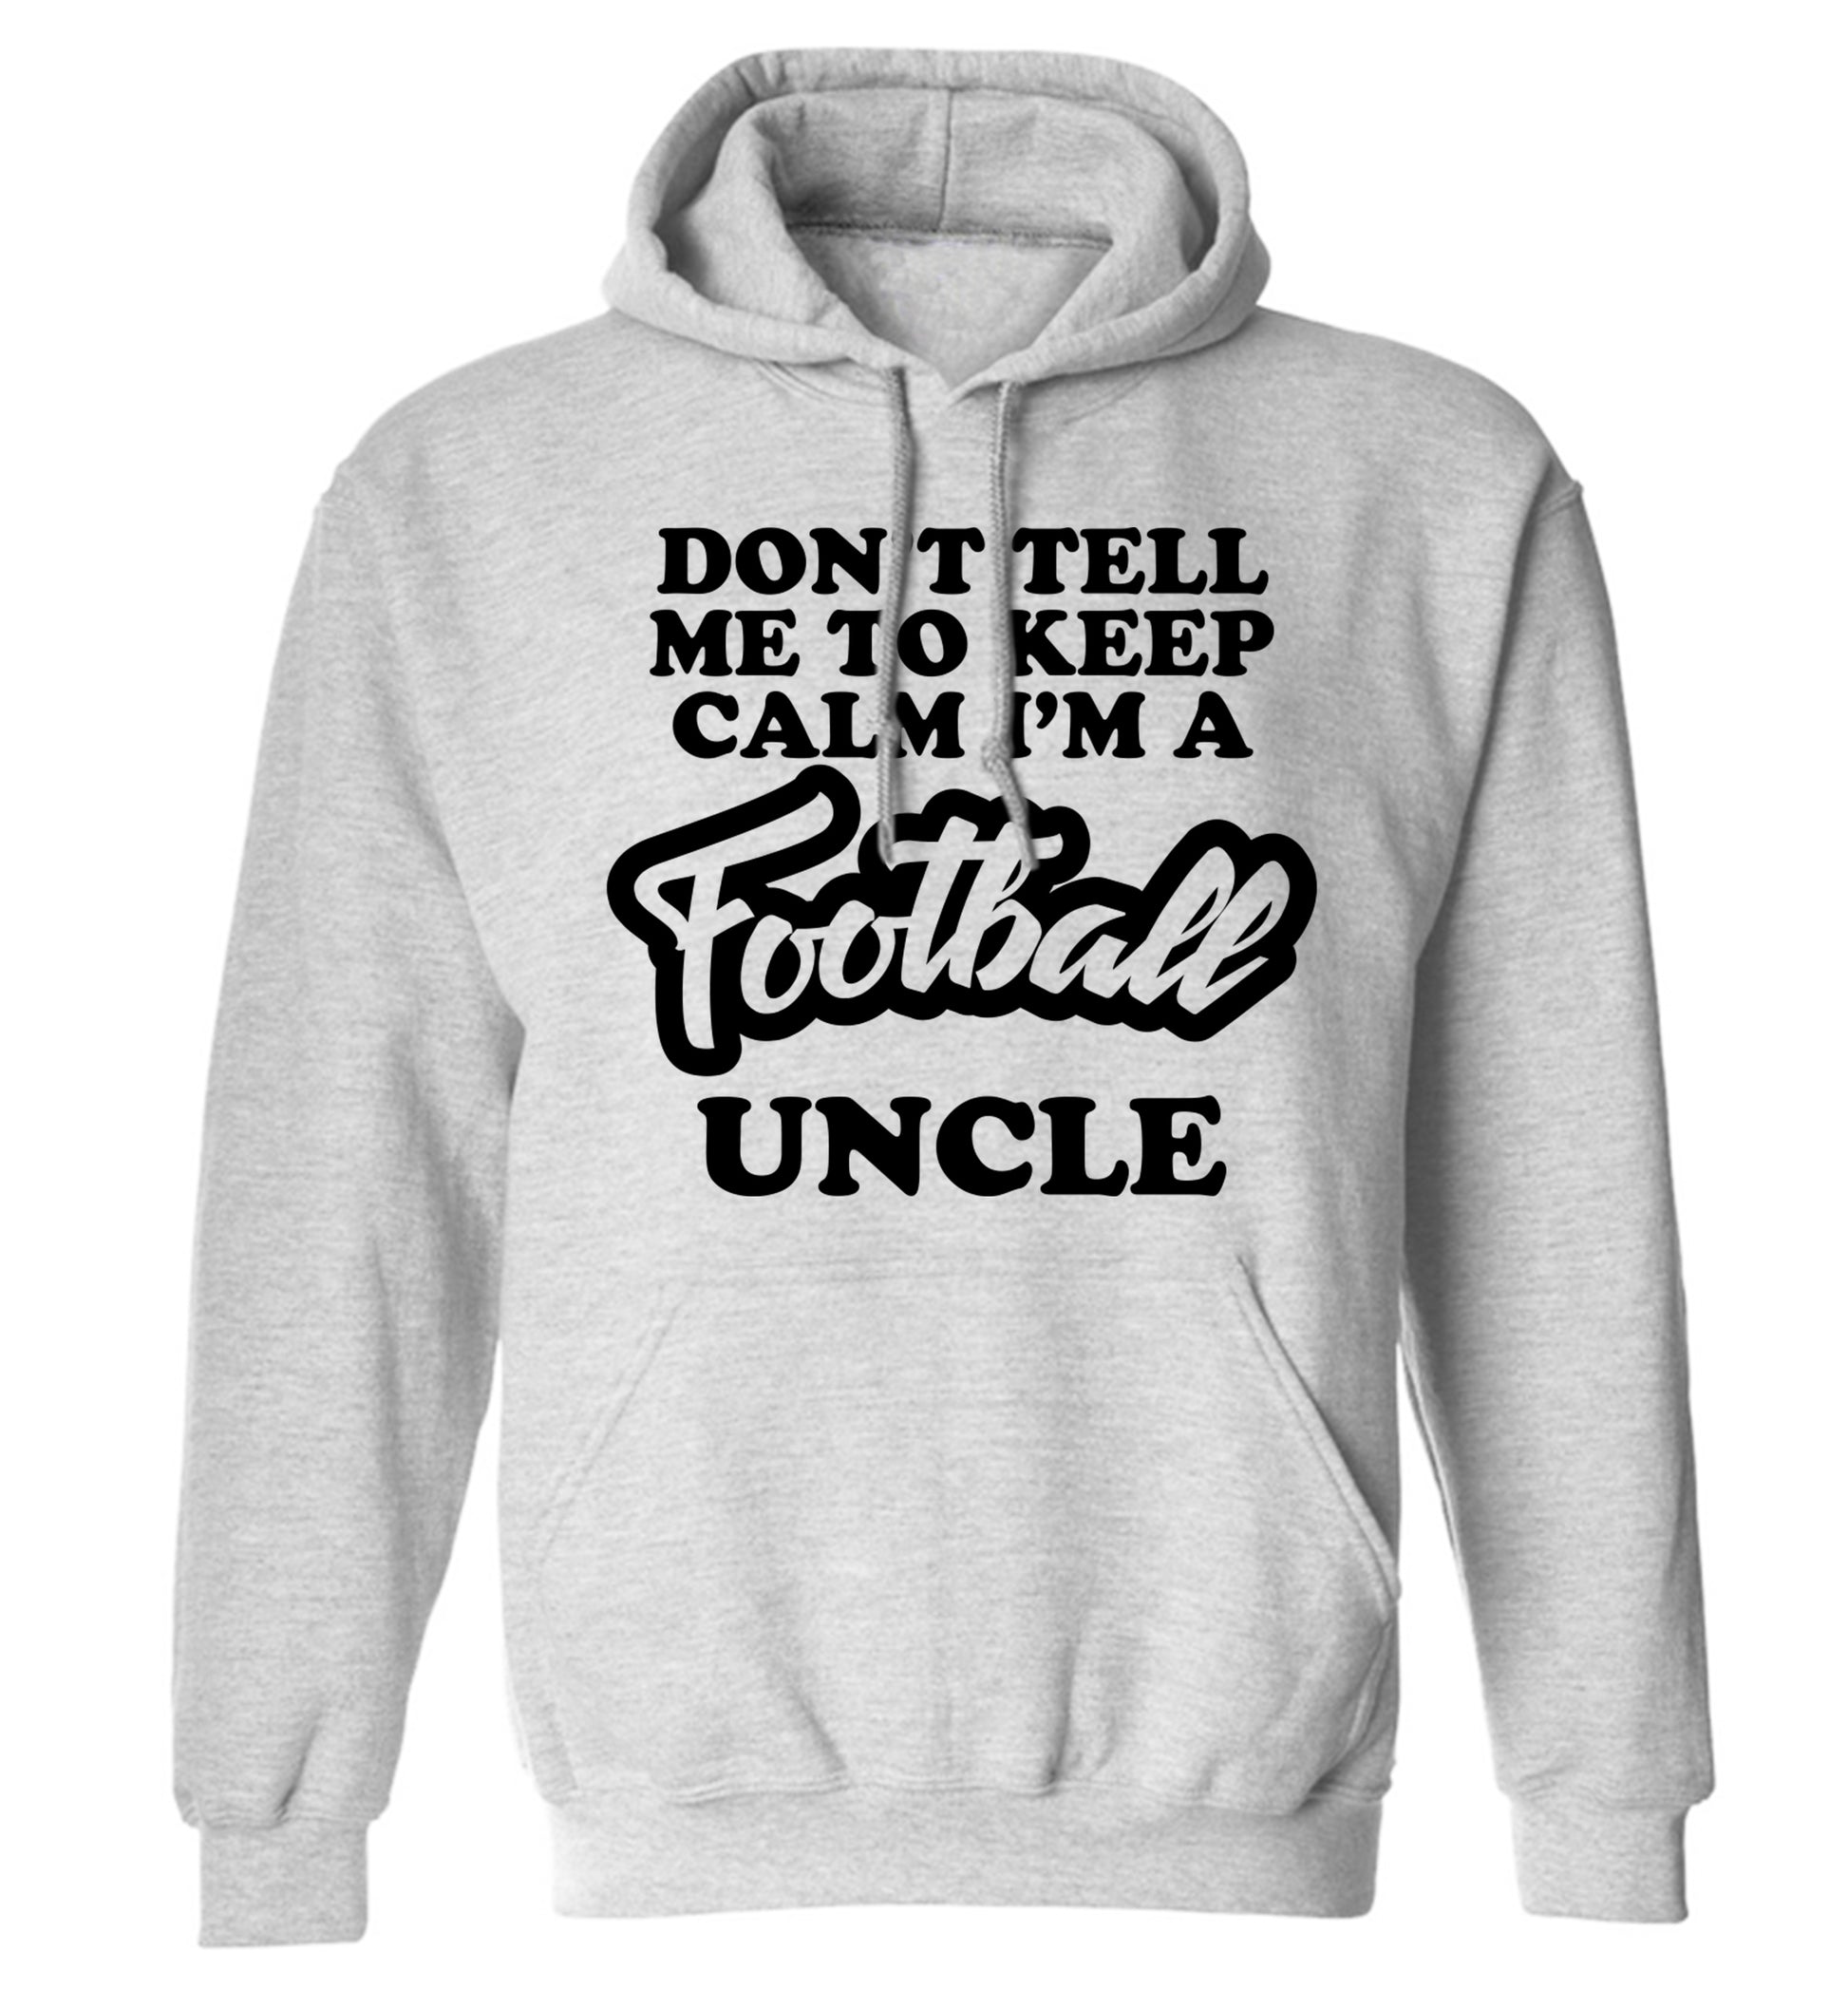 Don't tell me to keep calm I'm a football uncle adults unisexgrey hoodie 2XL